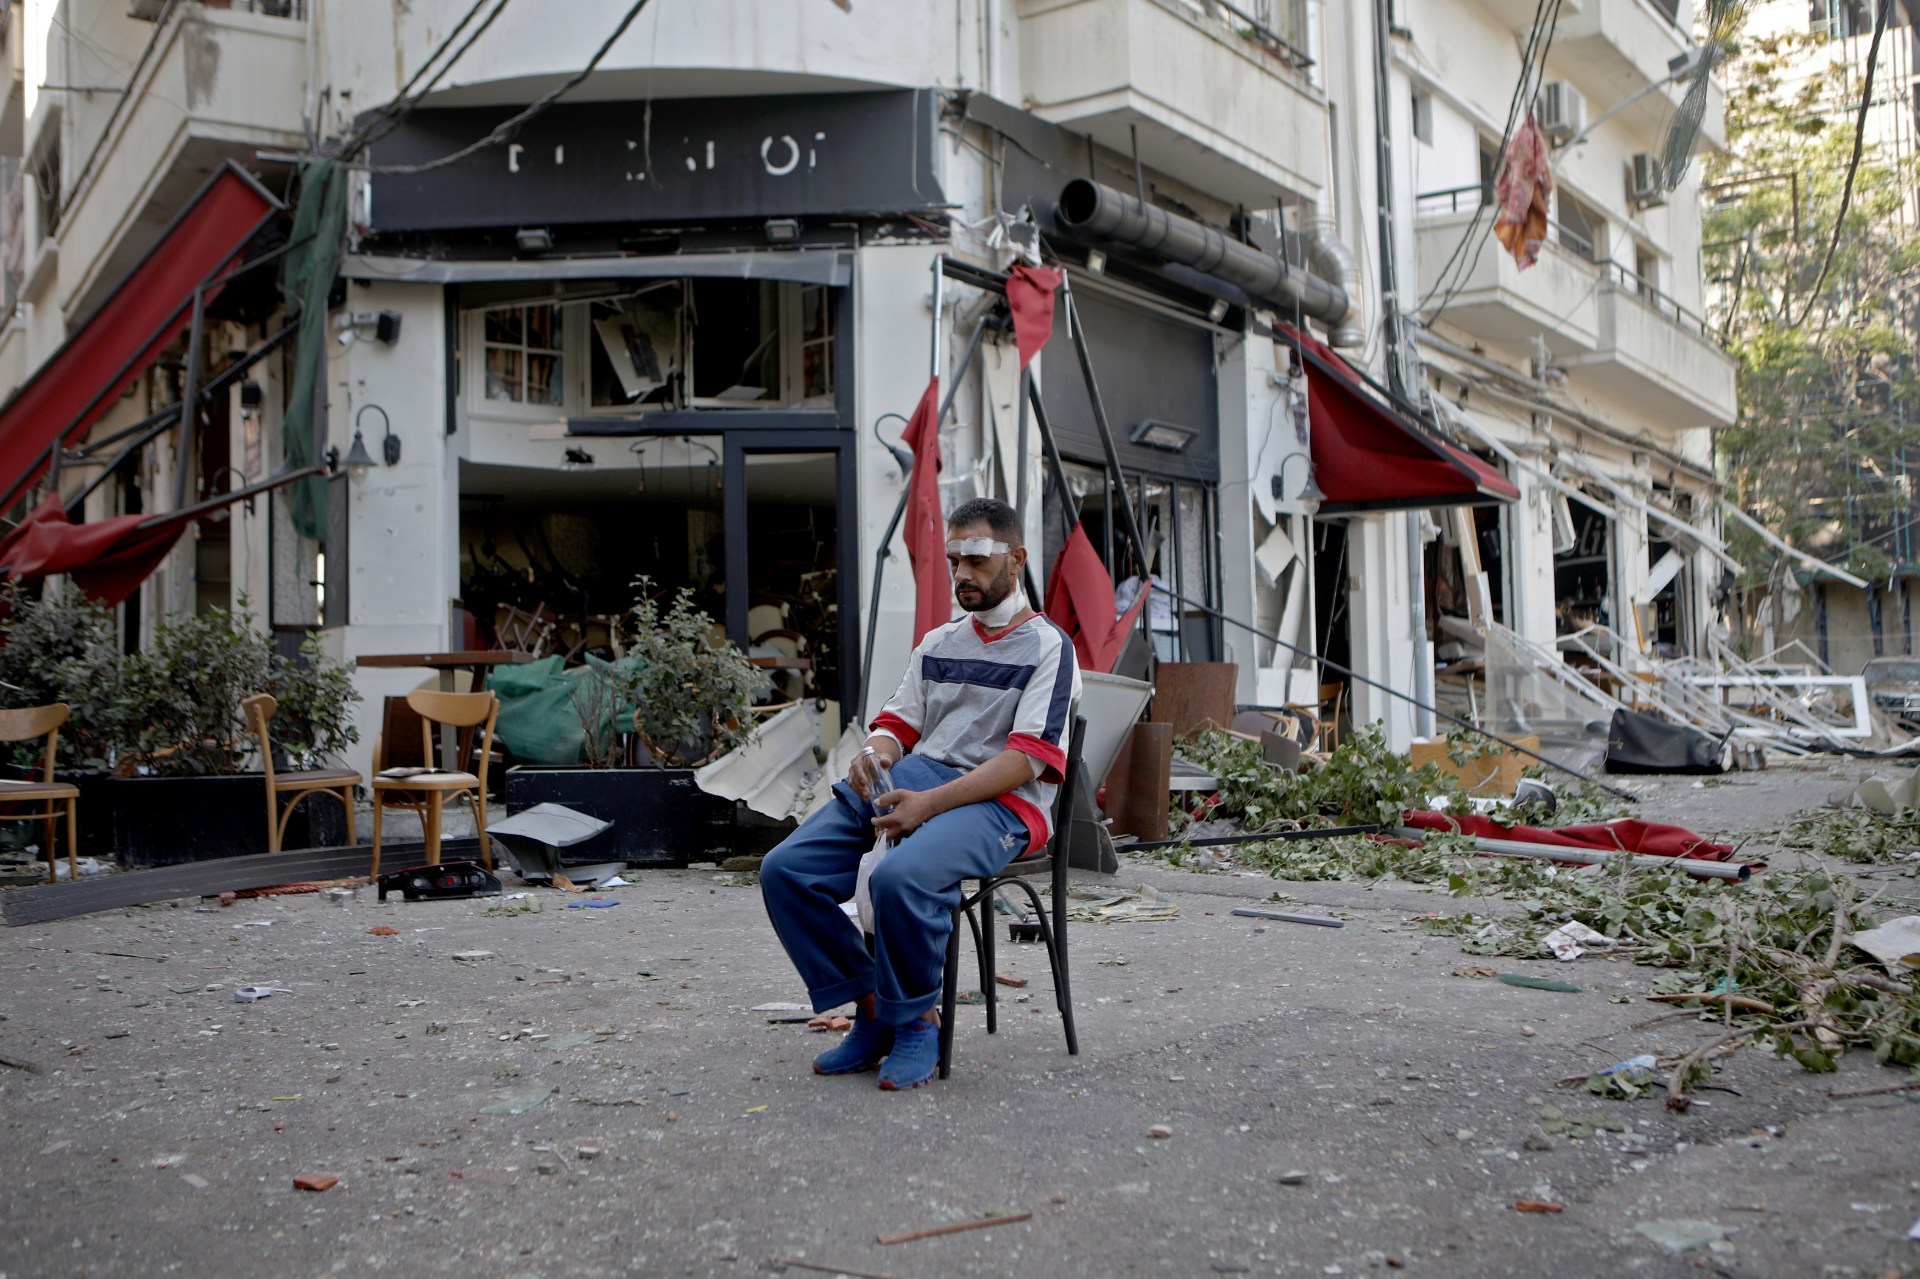 An injured man sits next to a restaurant in the trendy partially destroyed Beirut neighbourhood of Mar Mikhael (AFP)